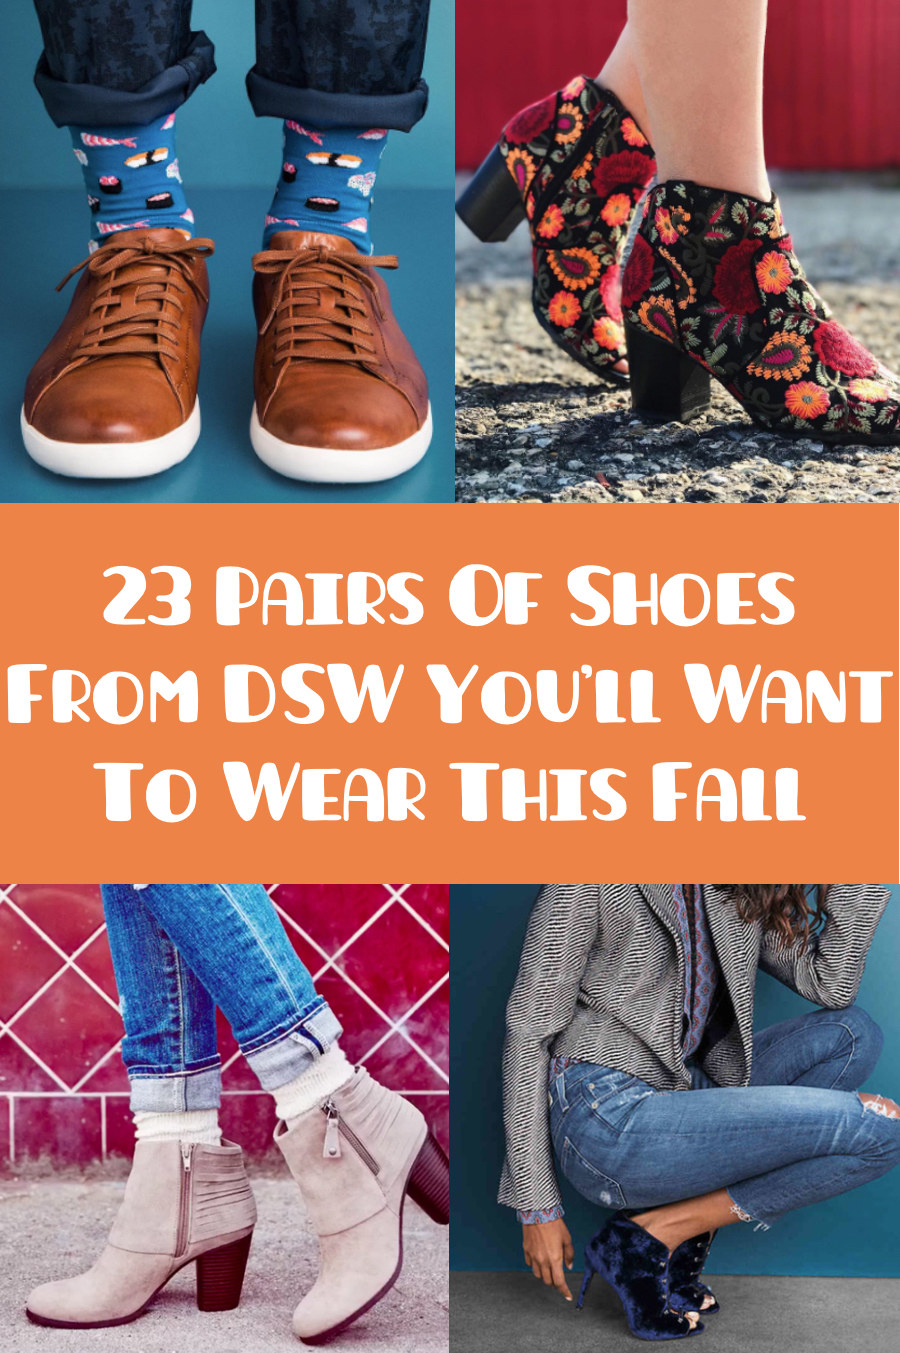 23 Pairs Of Shoes From DSW Made To 